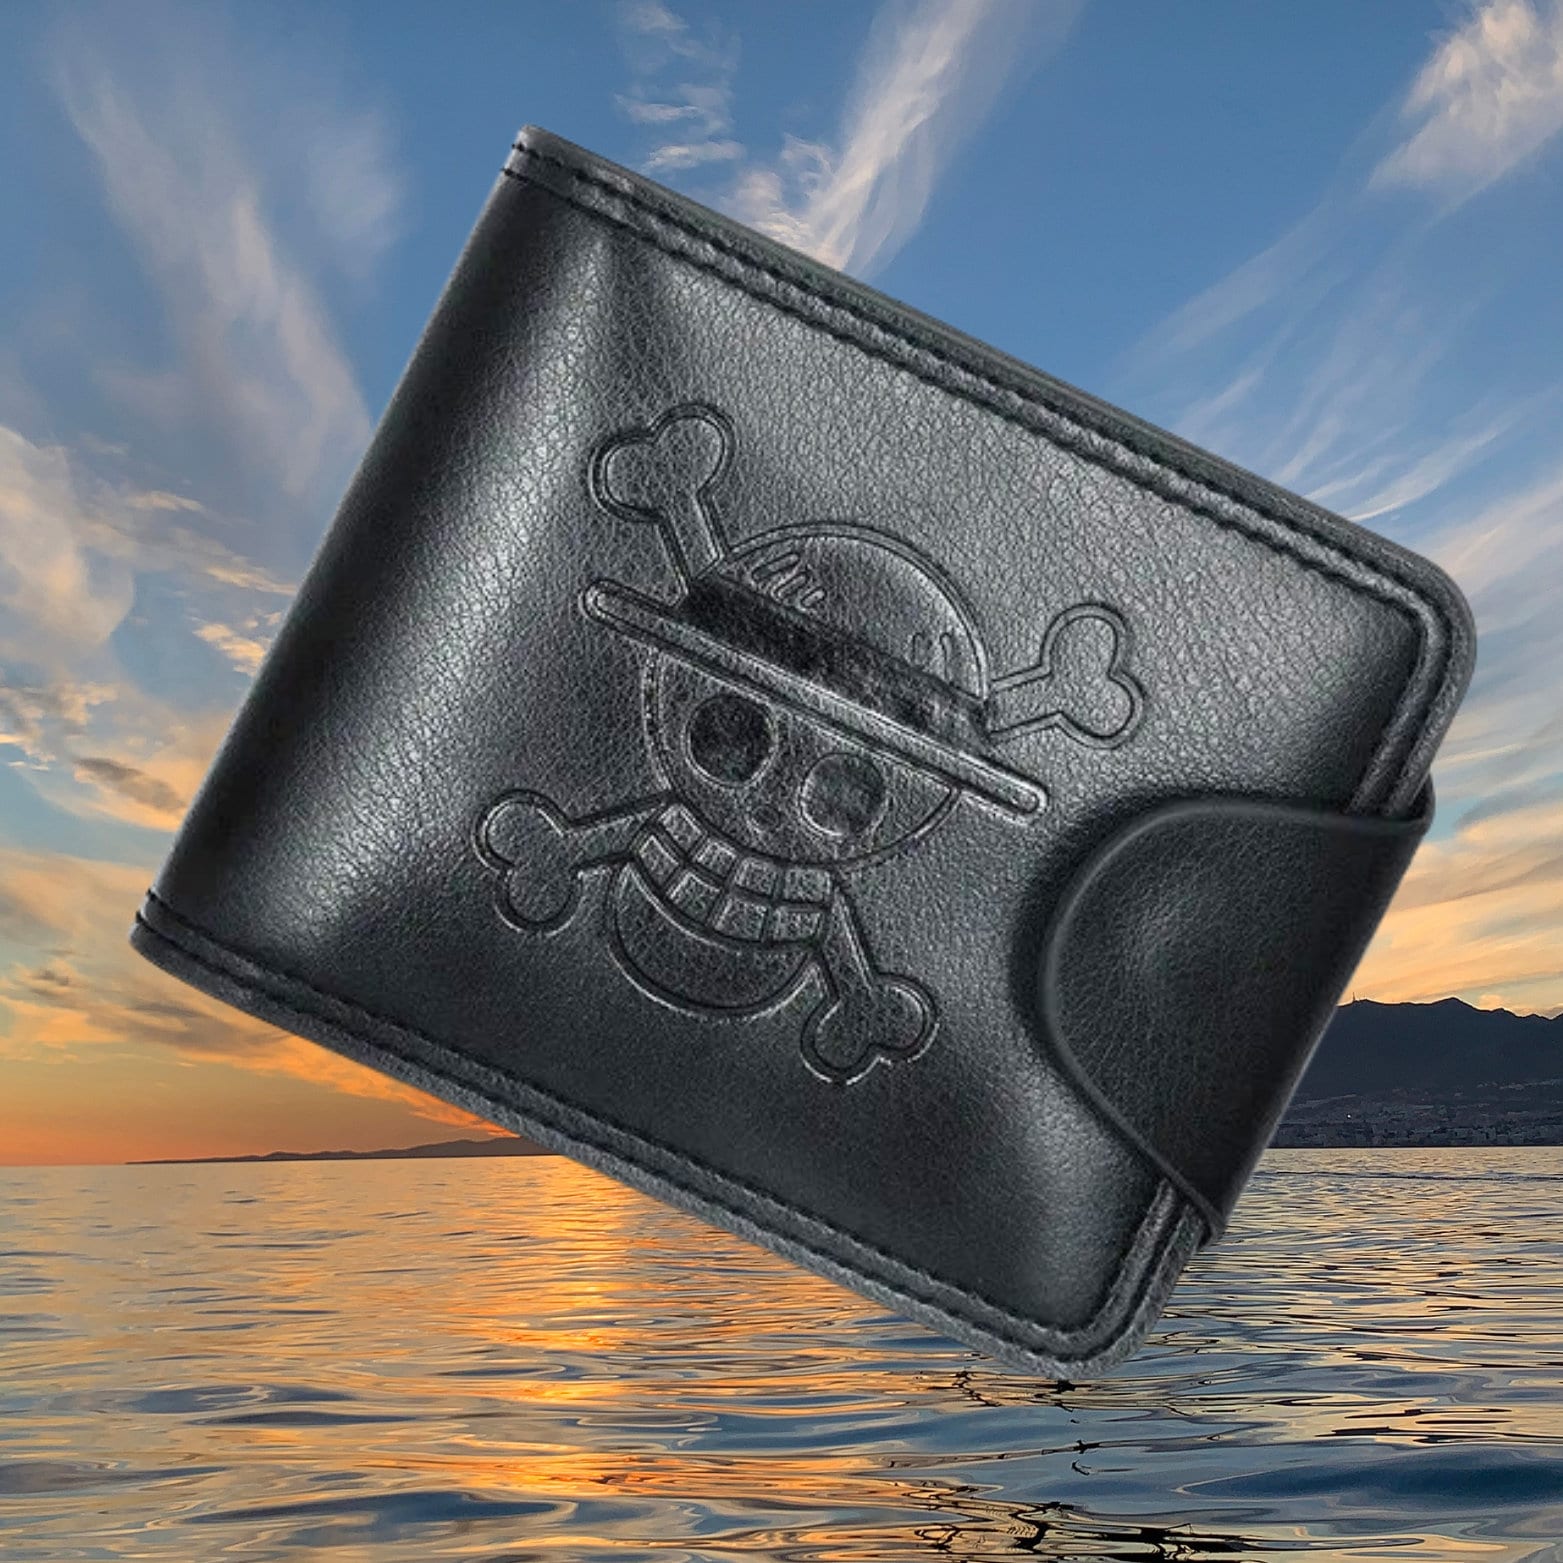 One piece wallet -  France